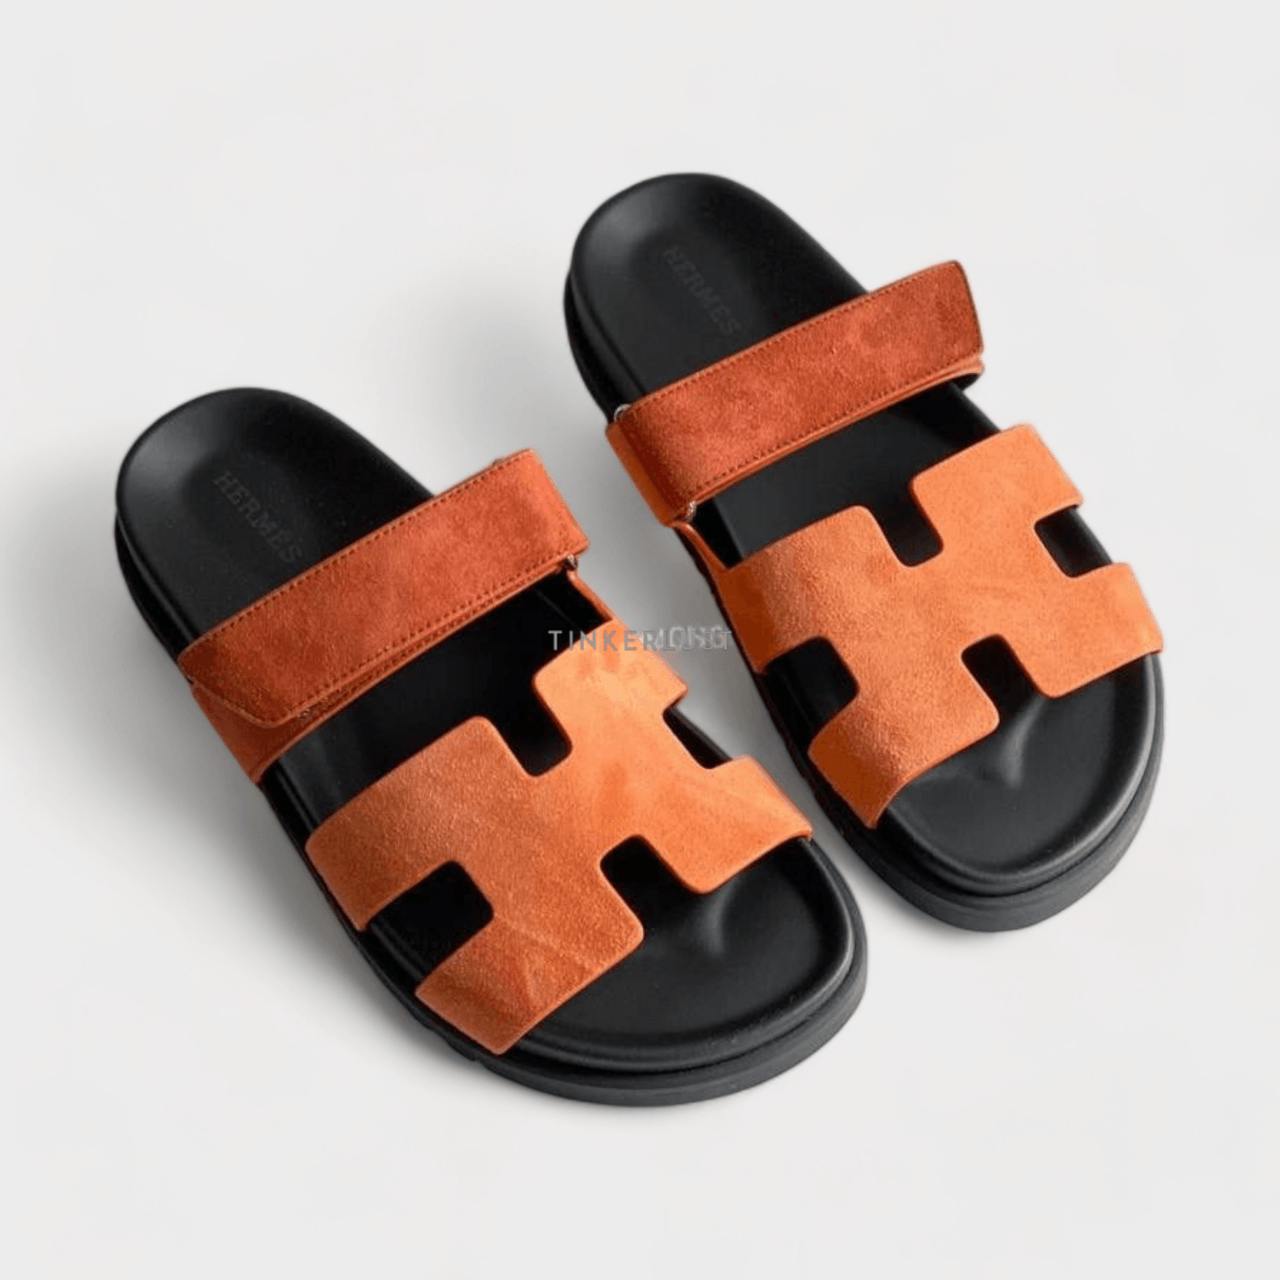 Hermes Chypre Santal/Rouge Ercalate Sandals